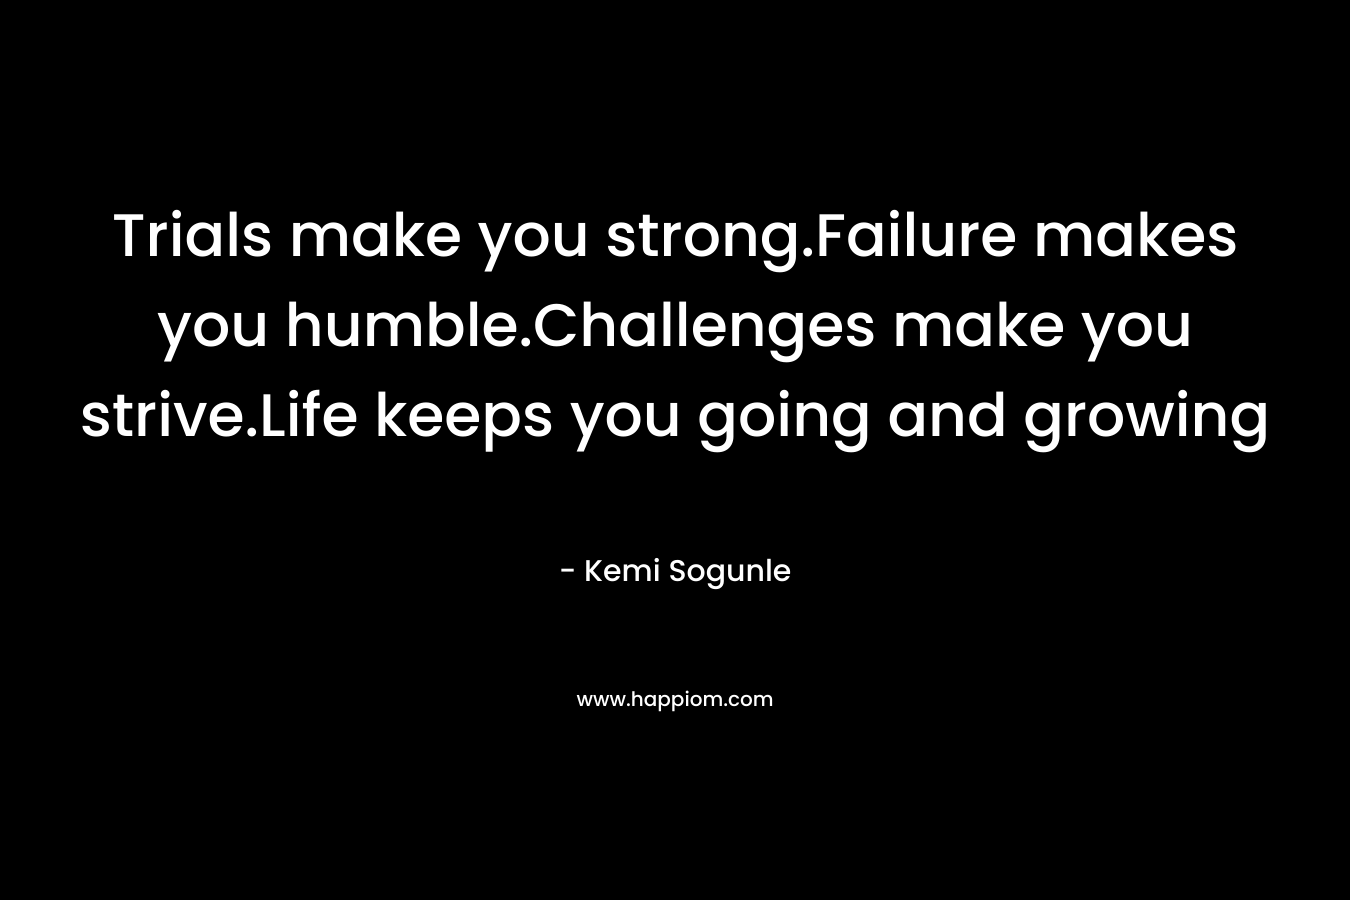 Trials make you strong.Failure makes you humble.Challenges make you strive.Life keeps you going and growing